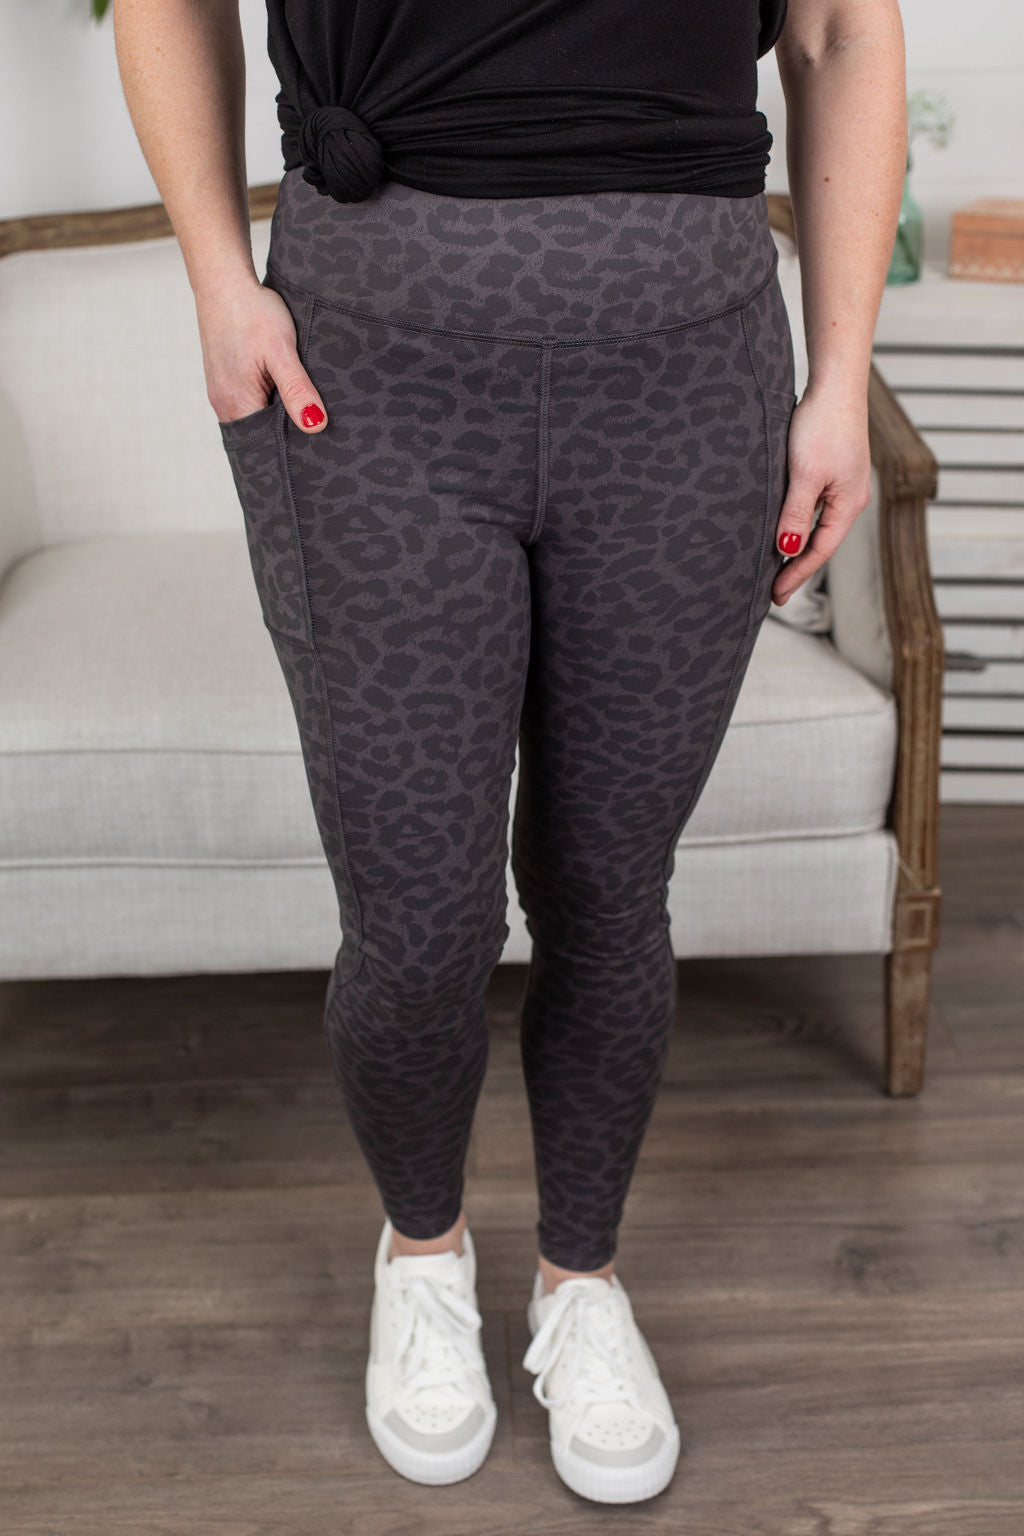 IN STOCK Athleisure Leggings - Charcoal Leopard